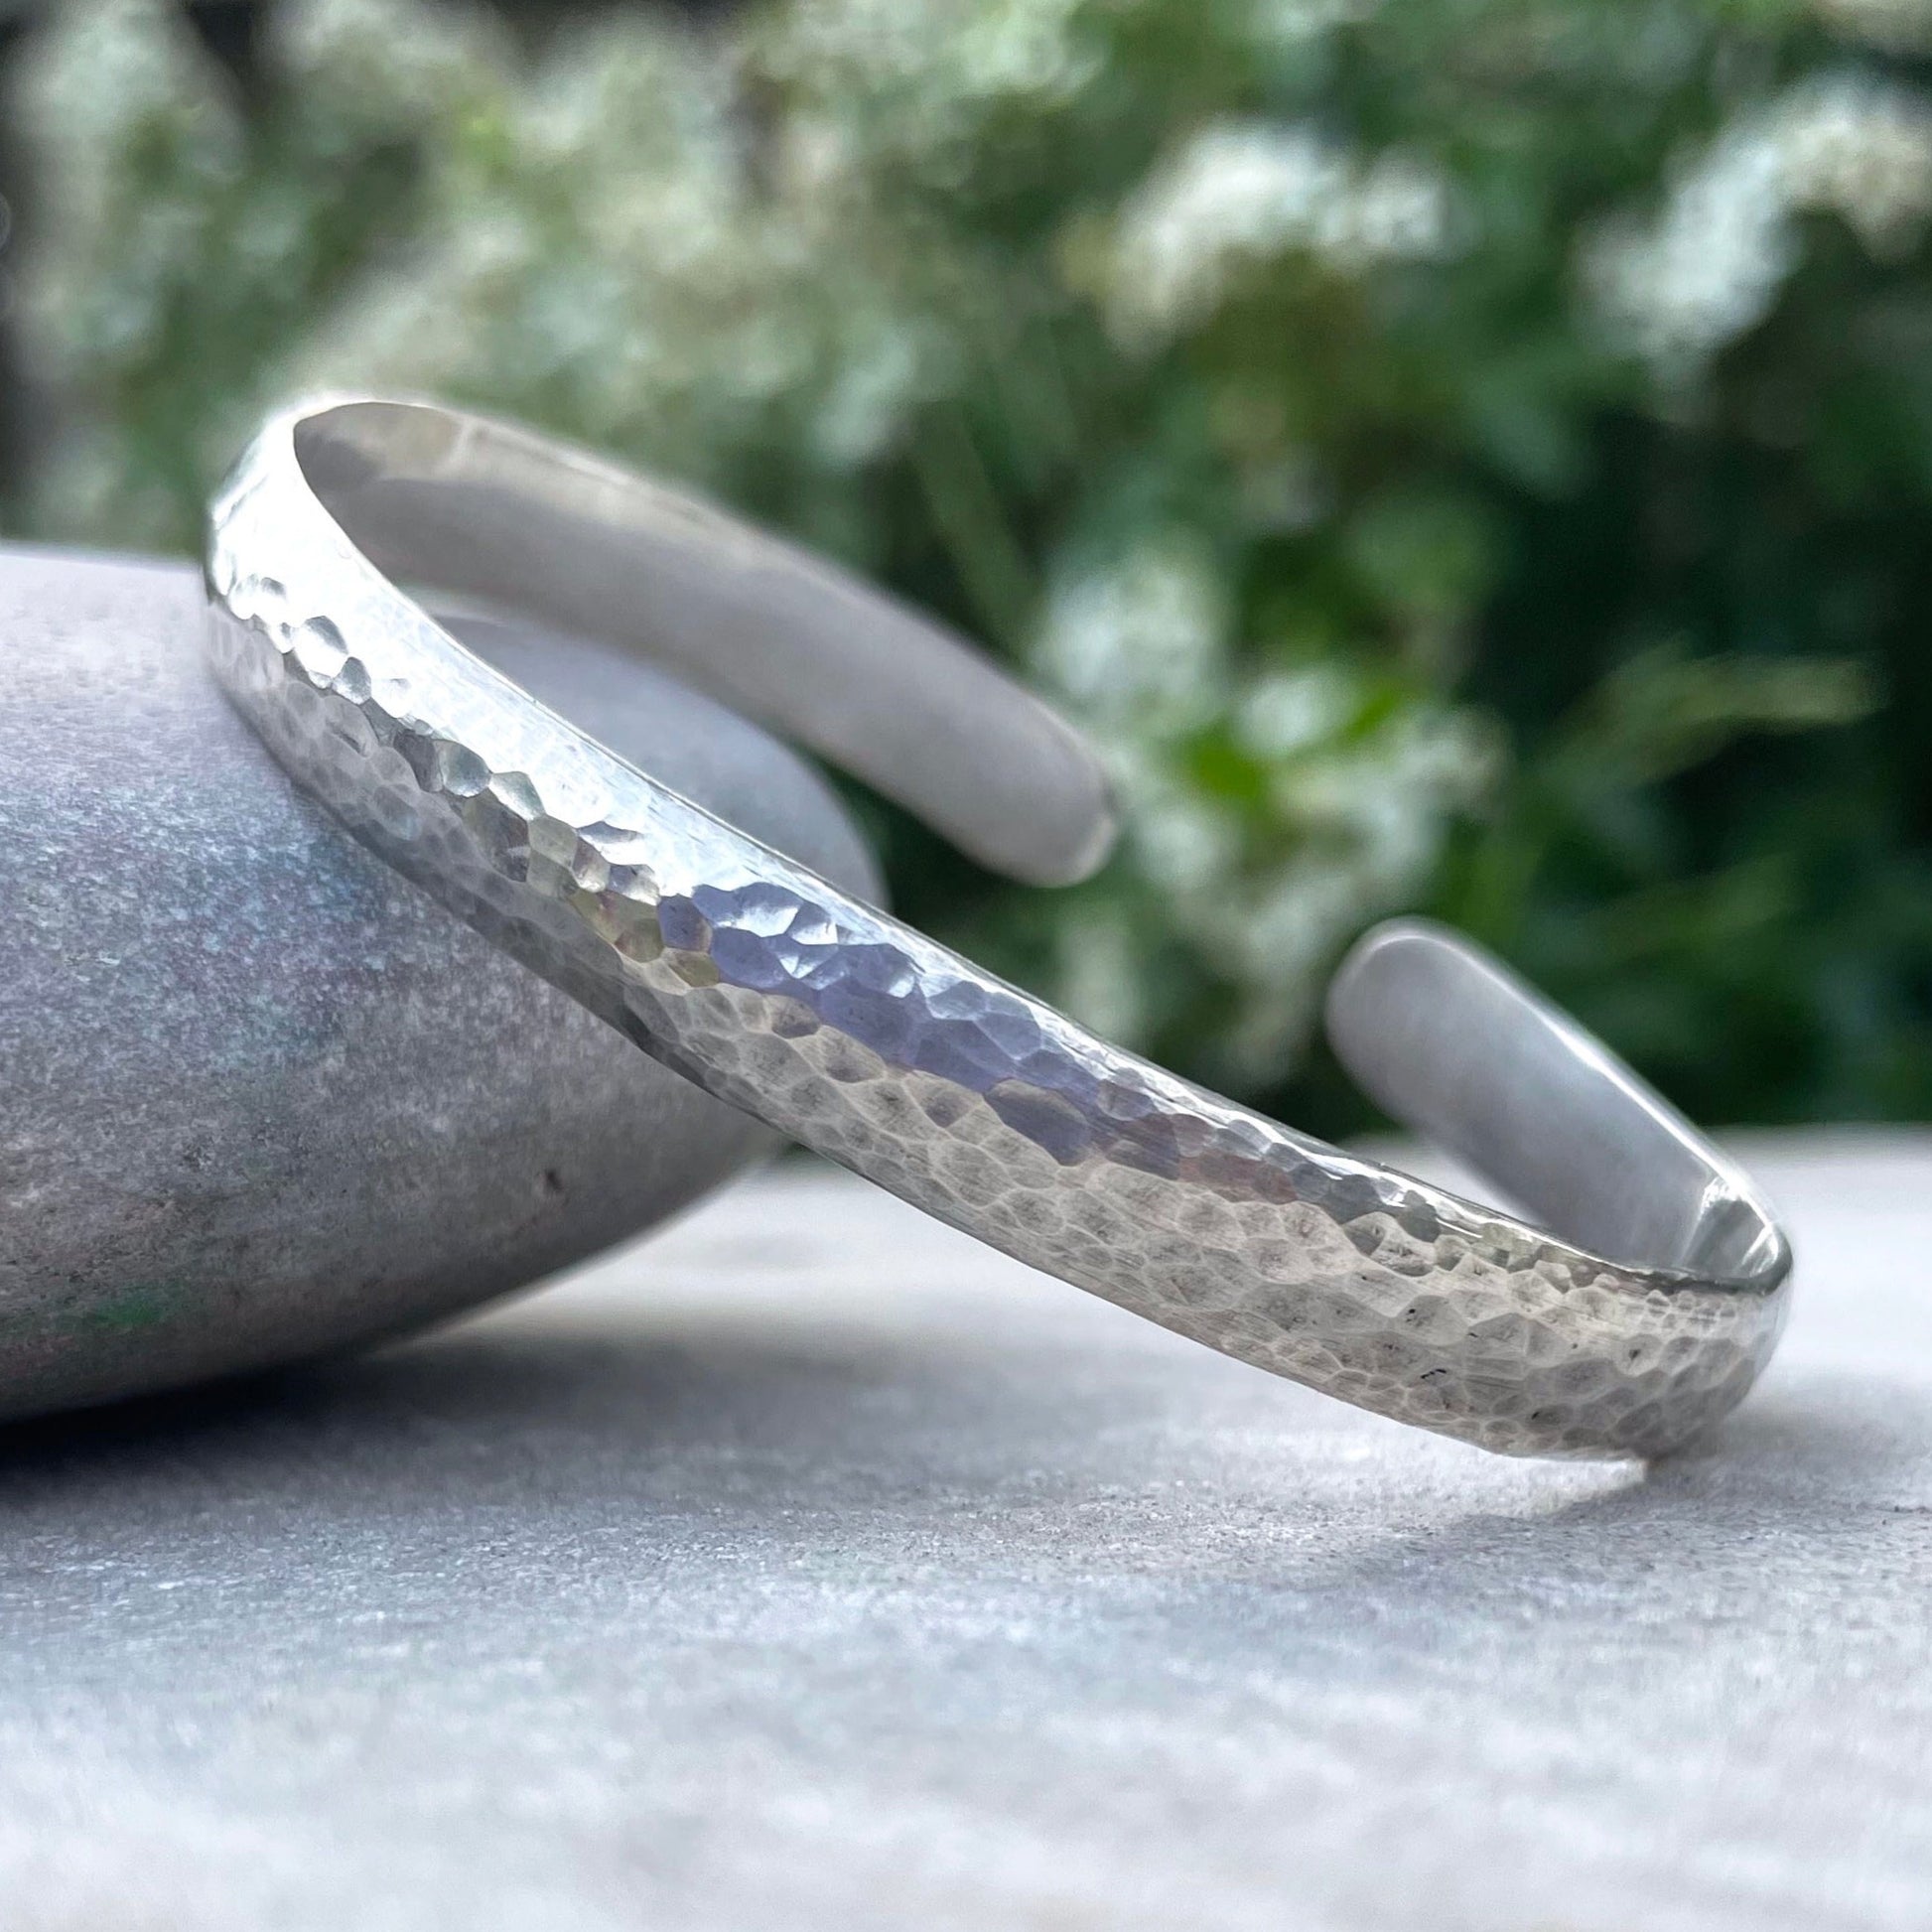 Silver Meteorite Cuff Bangle by Curious Magpie Jewellery